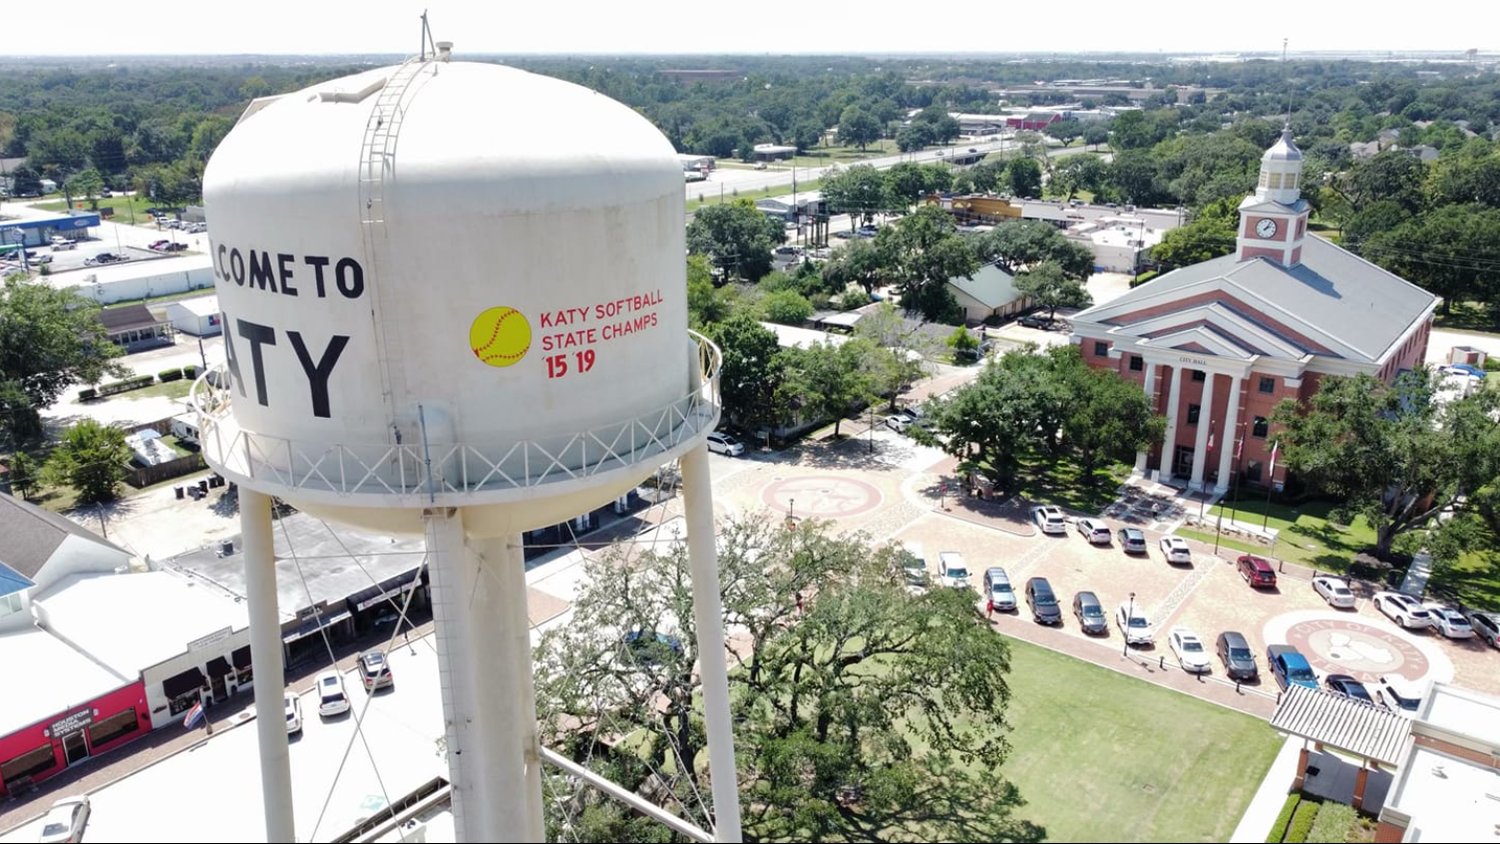 The Katy Police Department operates a drone, which in 2021 took this photo of the iconic Katy water tower, which had been updated to honor Katy High’s 2015 and 2019 state championships in softball.